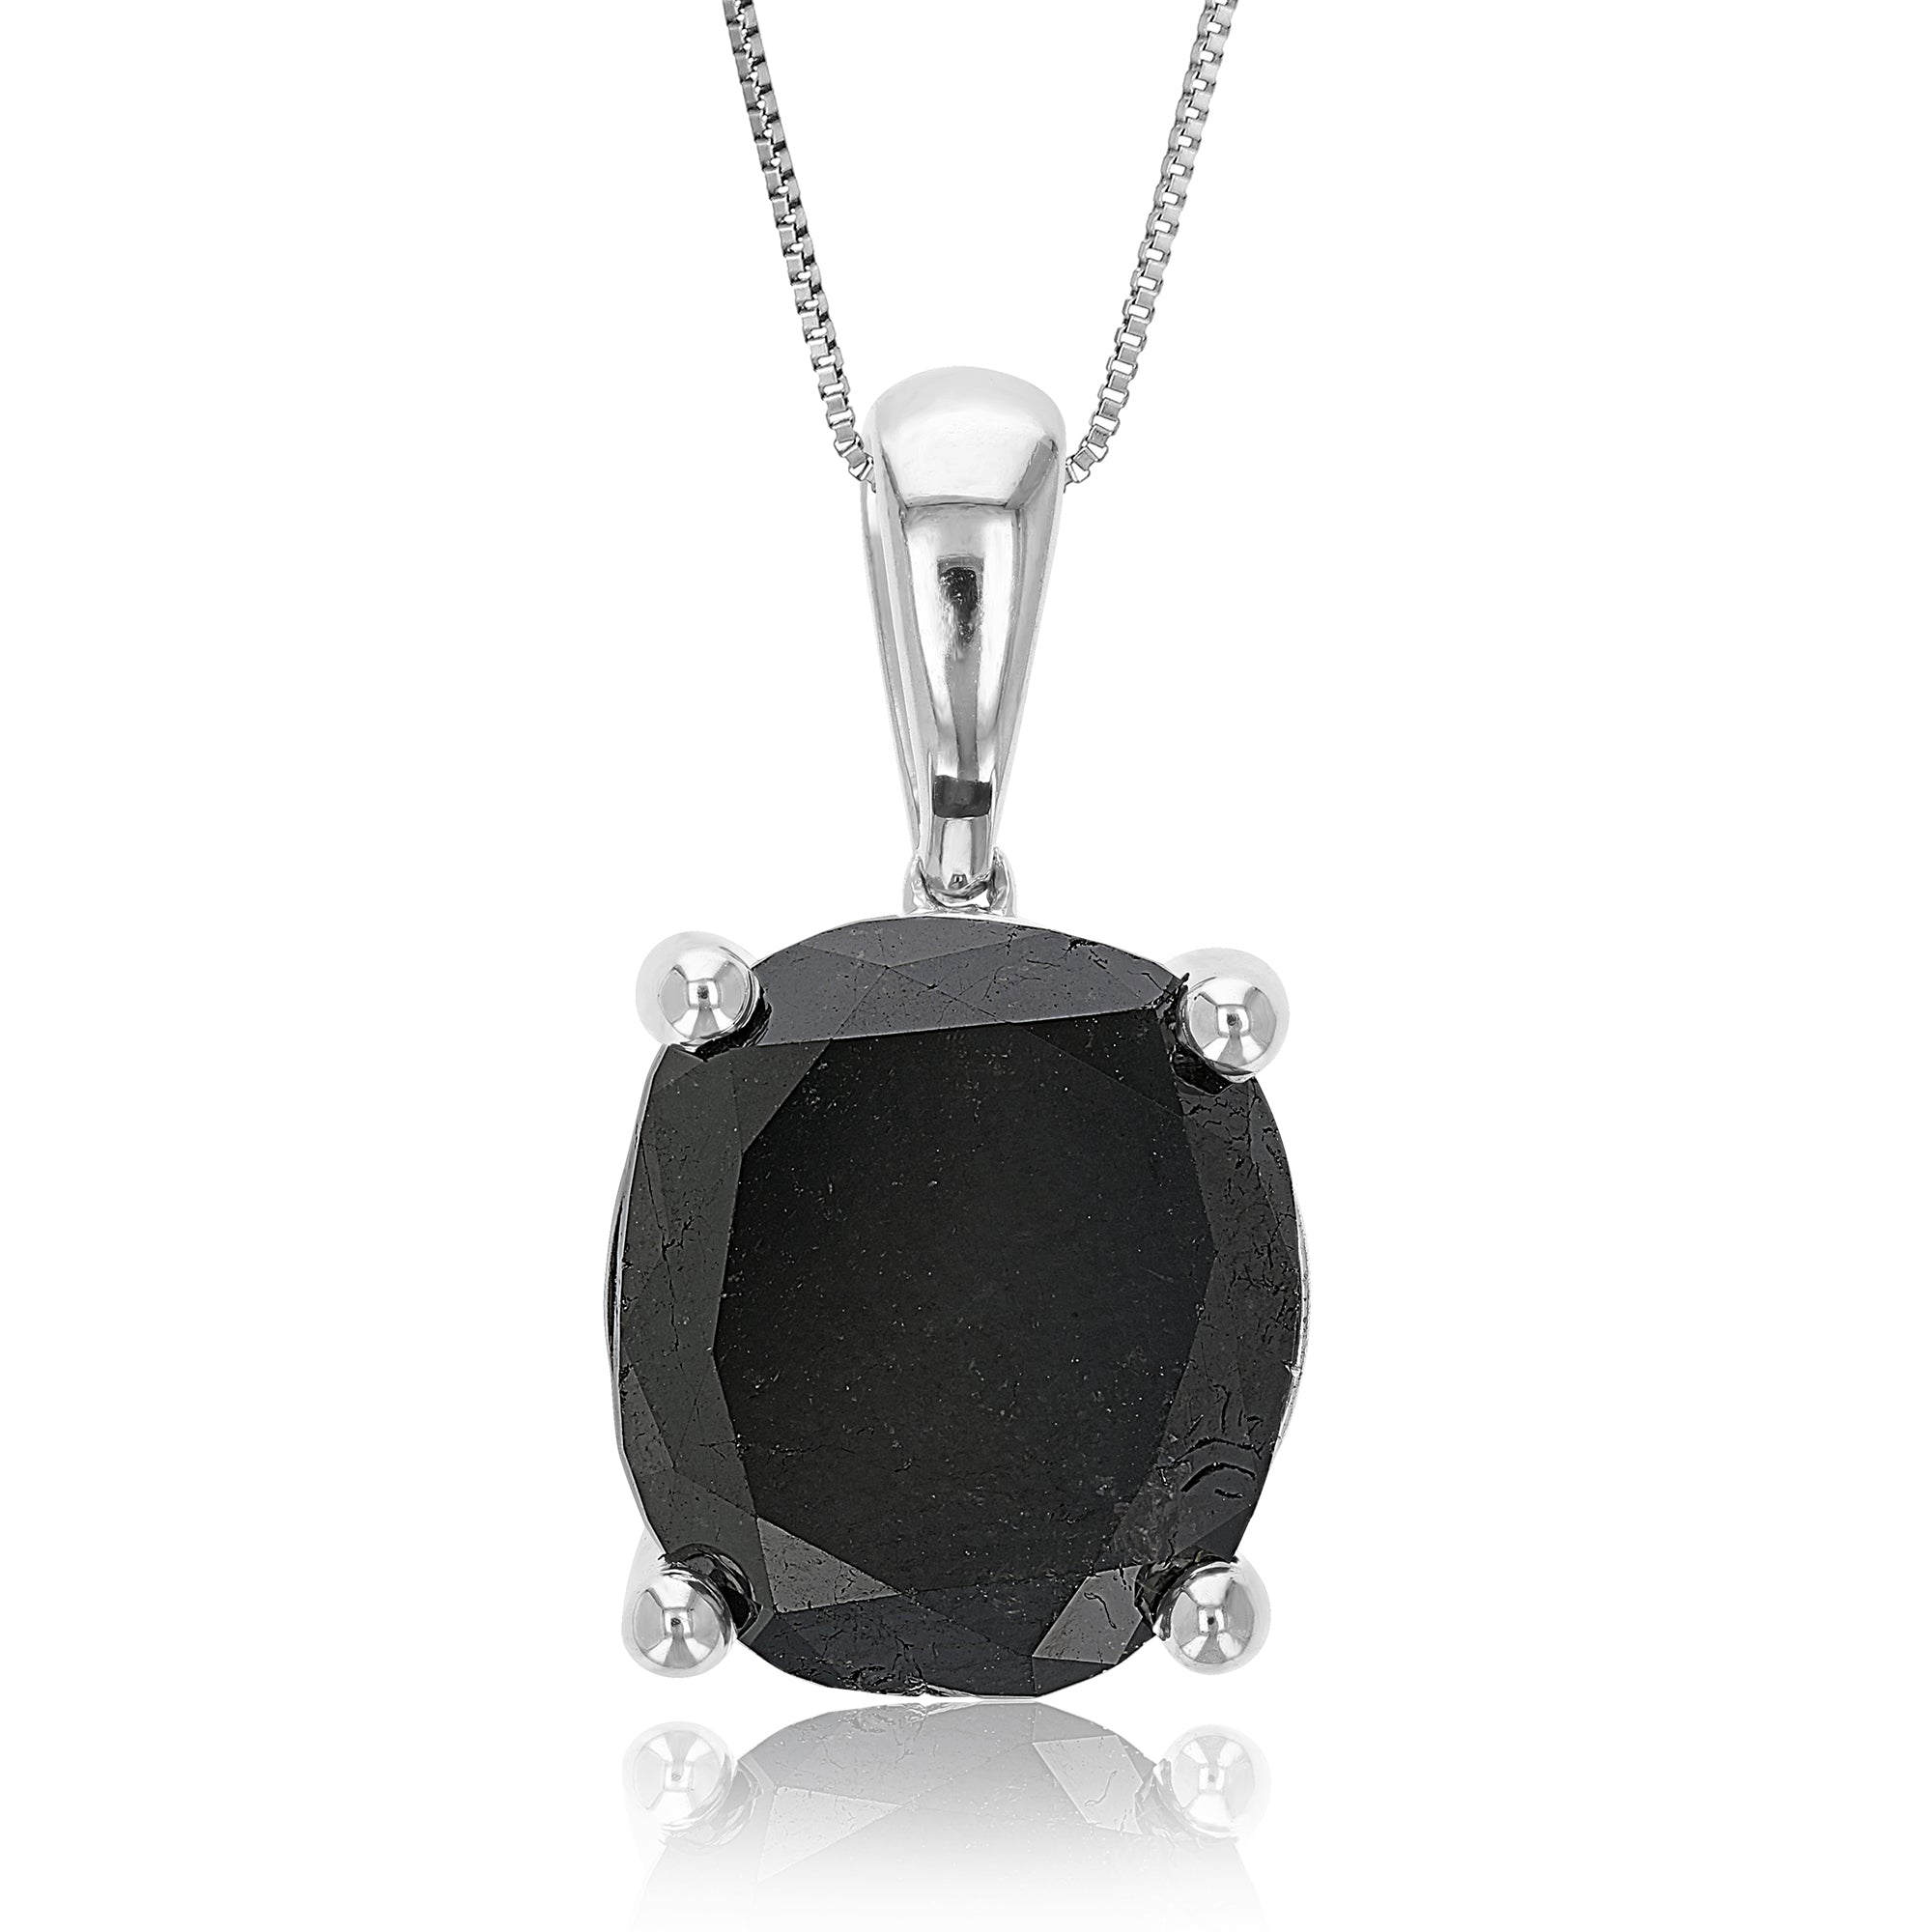 9.50 cttw Diamond Pendant, Black Diamond Oval Shape Pendant Necklace for Women in .925 Sterling Silver with 18 Inch Chain, Prong Setting